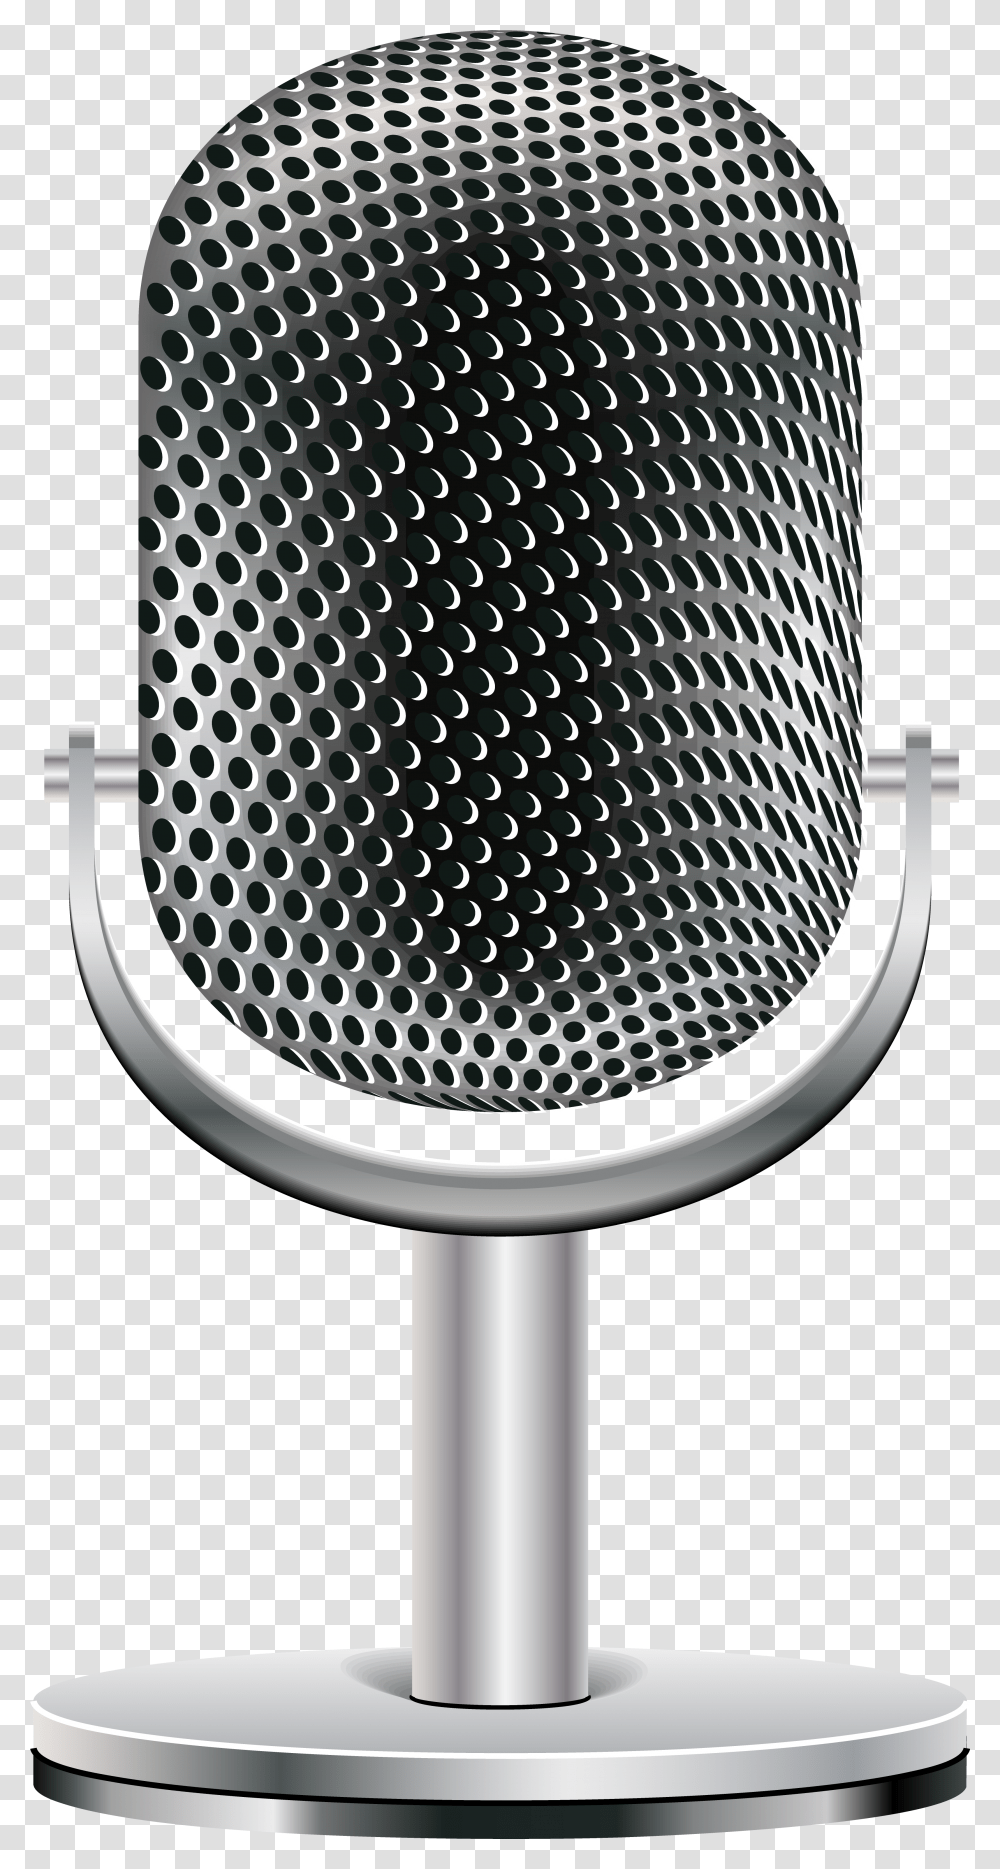 Microphone Clip Art Image Gallery Yopriceville Microphone Free Clipart Background, Electrical Device, Lamp Transparent Png